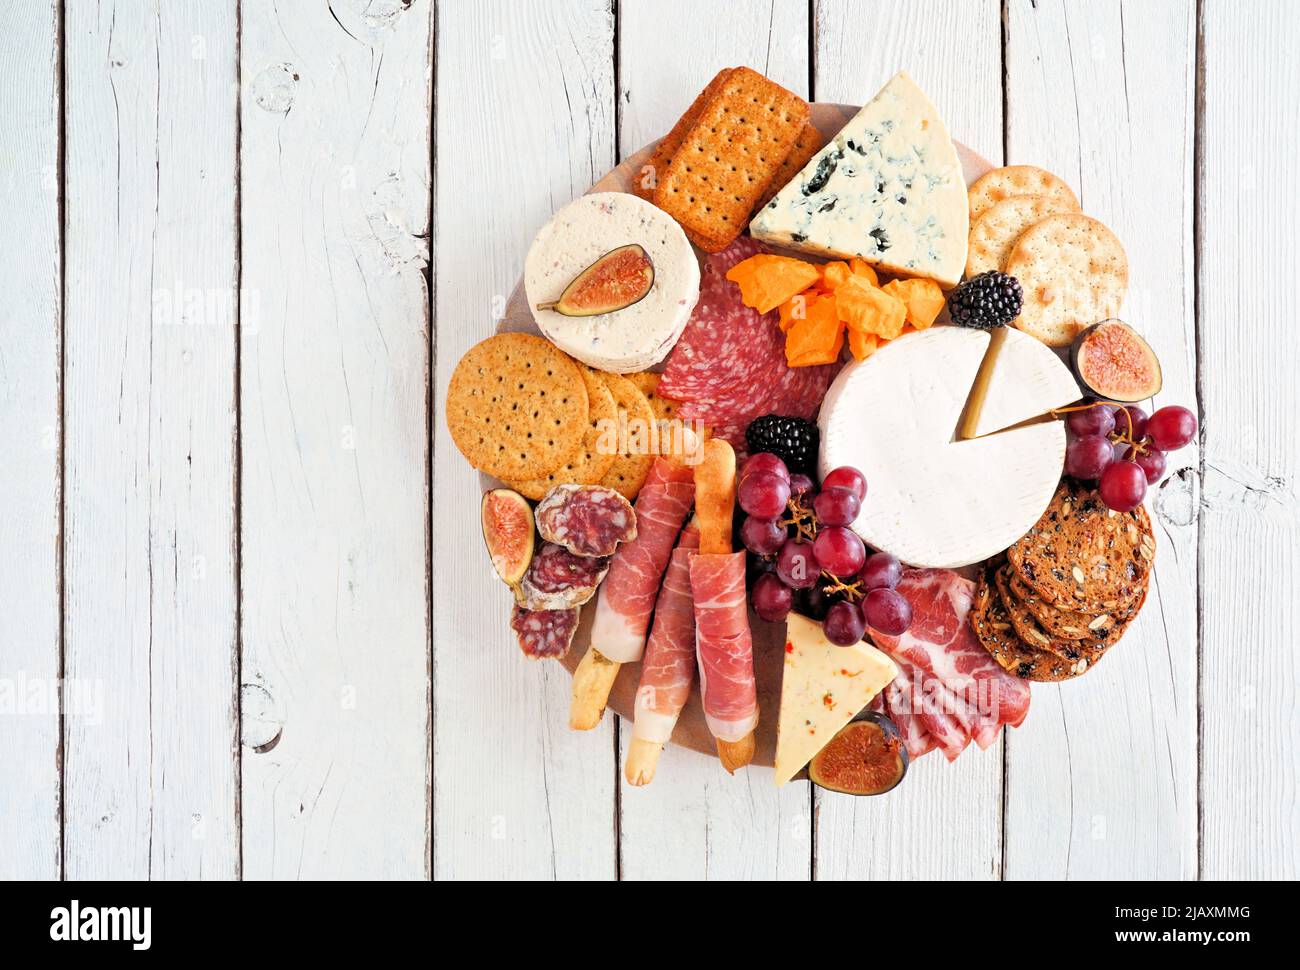 Charcuterie platter with different meats, cheeses and appetizers. Top view on a white wood background. Stock Photo